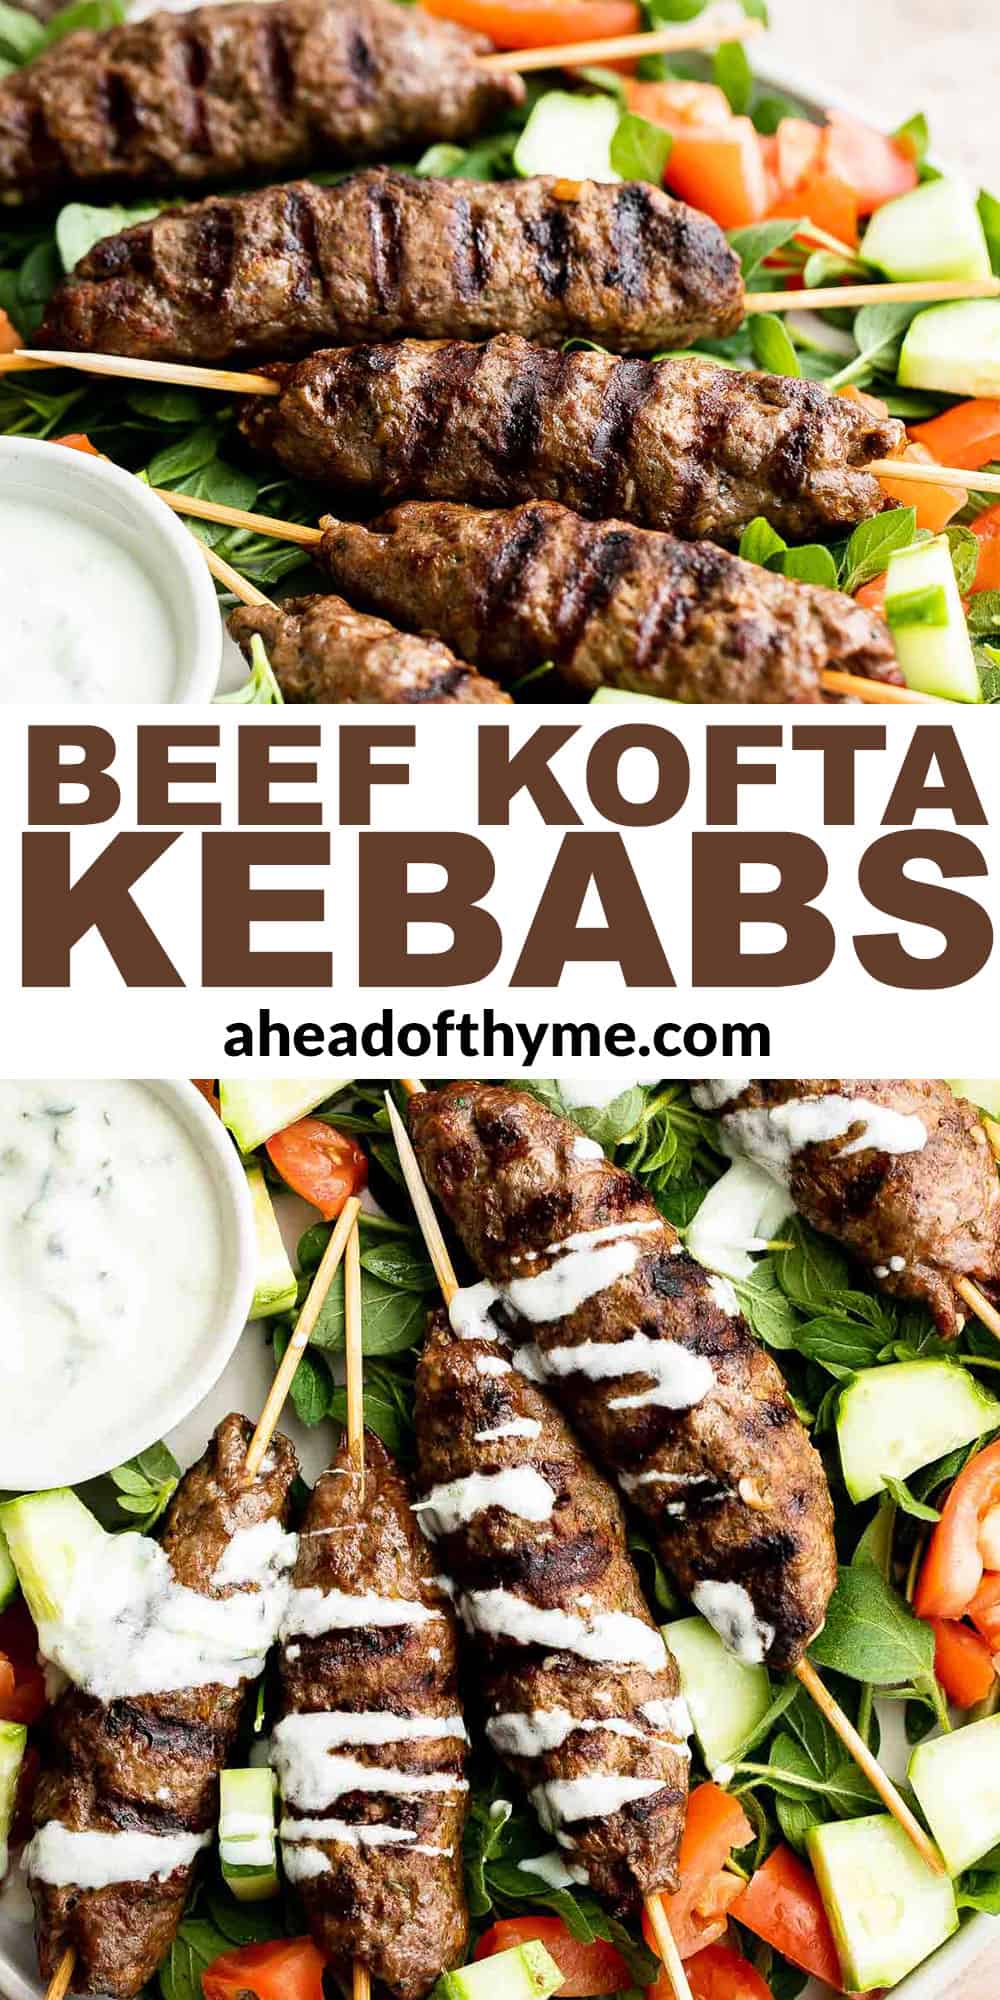 Mediterranean Beef Kofta Kebabs are juicy, tender, flavorful, and well seasoned . These grilled ground beef skewers are quick and easy to make in 30 minutes. | aheadofthyme.com